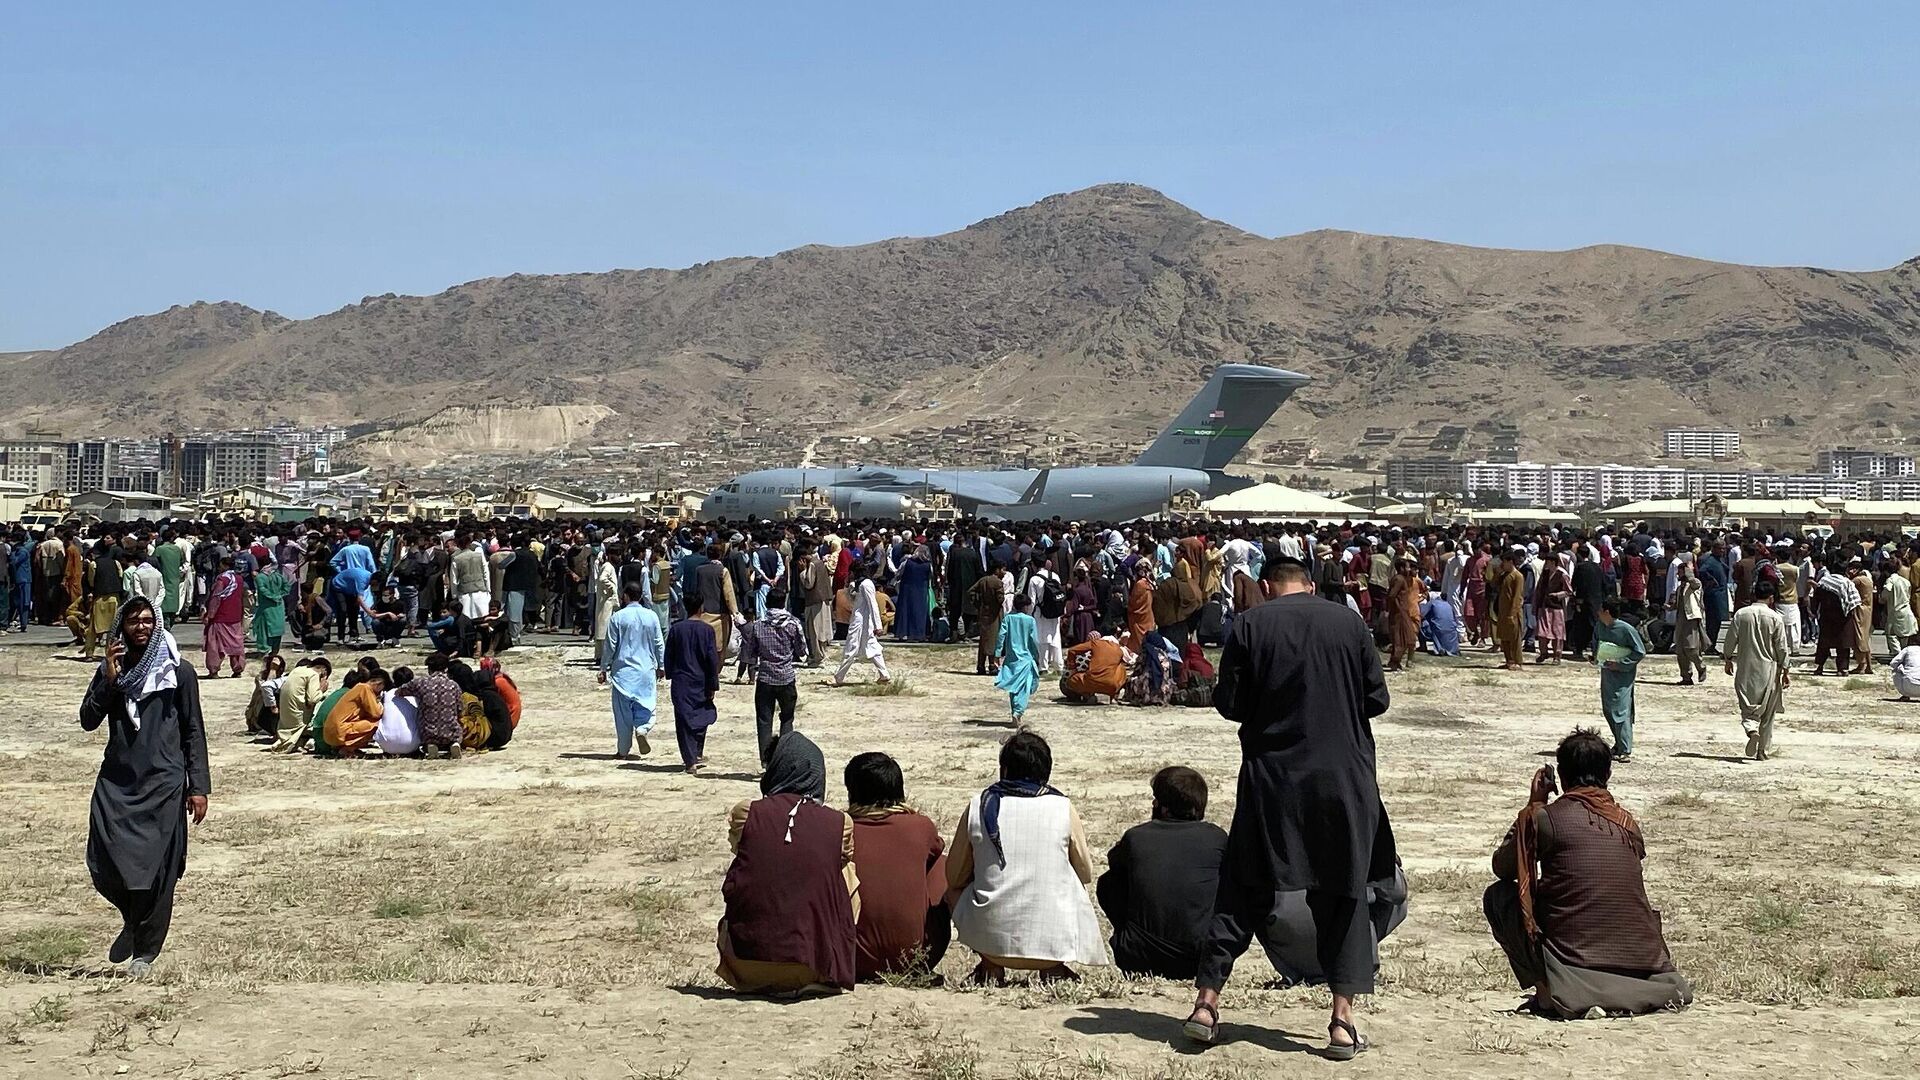  In this Aug. 16, 2021, file photo, hundreds of people gather near a U.S. Air Force C-17 transport plane at the perimeter of the international airport in Kabul, Afghanistan. Ordinary Americans and the nation's airlines are combining to donate miles and cash to help Afghan refugees resettle in the United States. Organizers said Tuesday, Oct. 26, they have raised enough donations pay for 40,000 flights, but they're hoping to nearly double that amount.  - Sputnik International, 1920, 14.06.2022